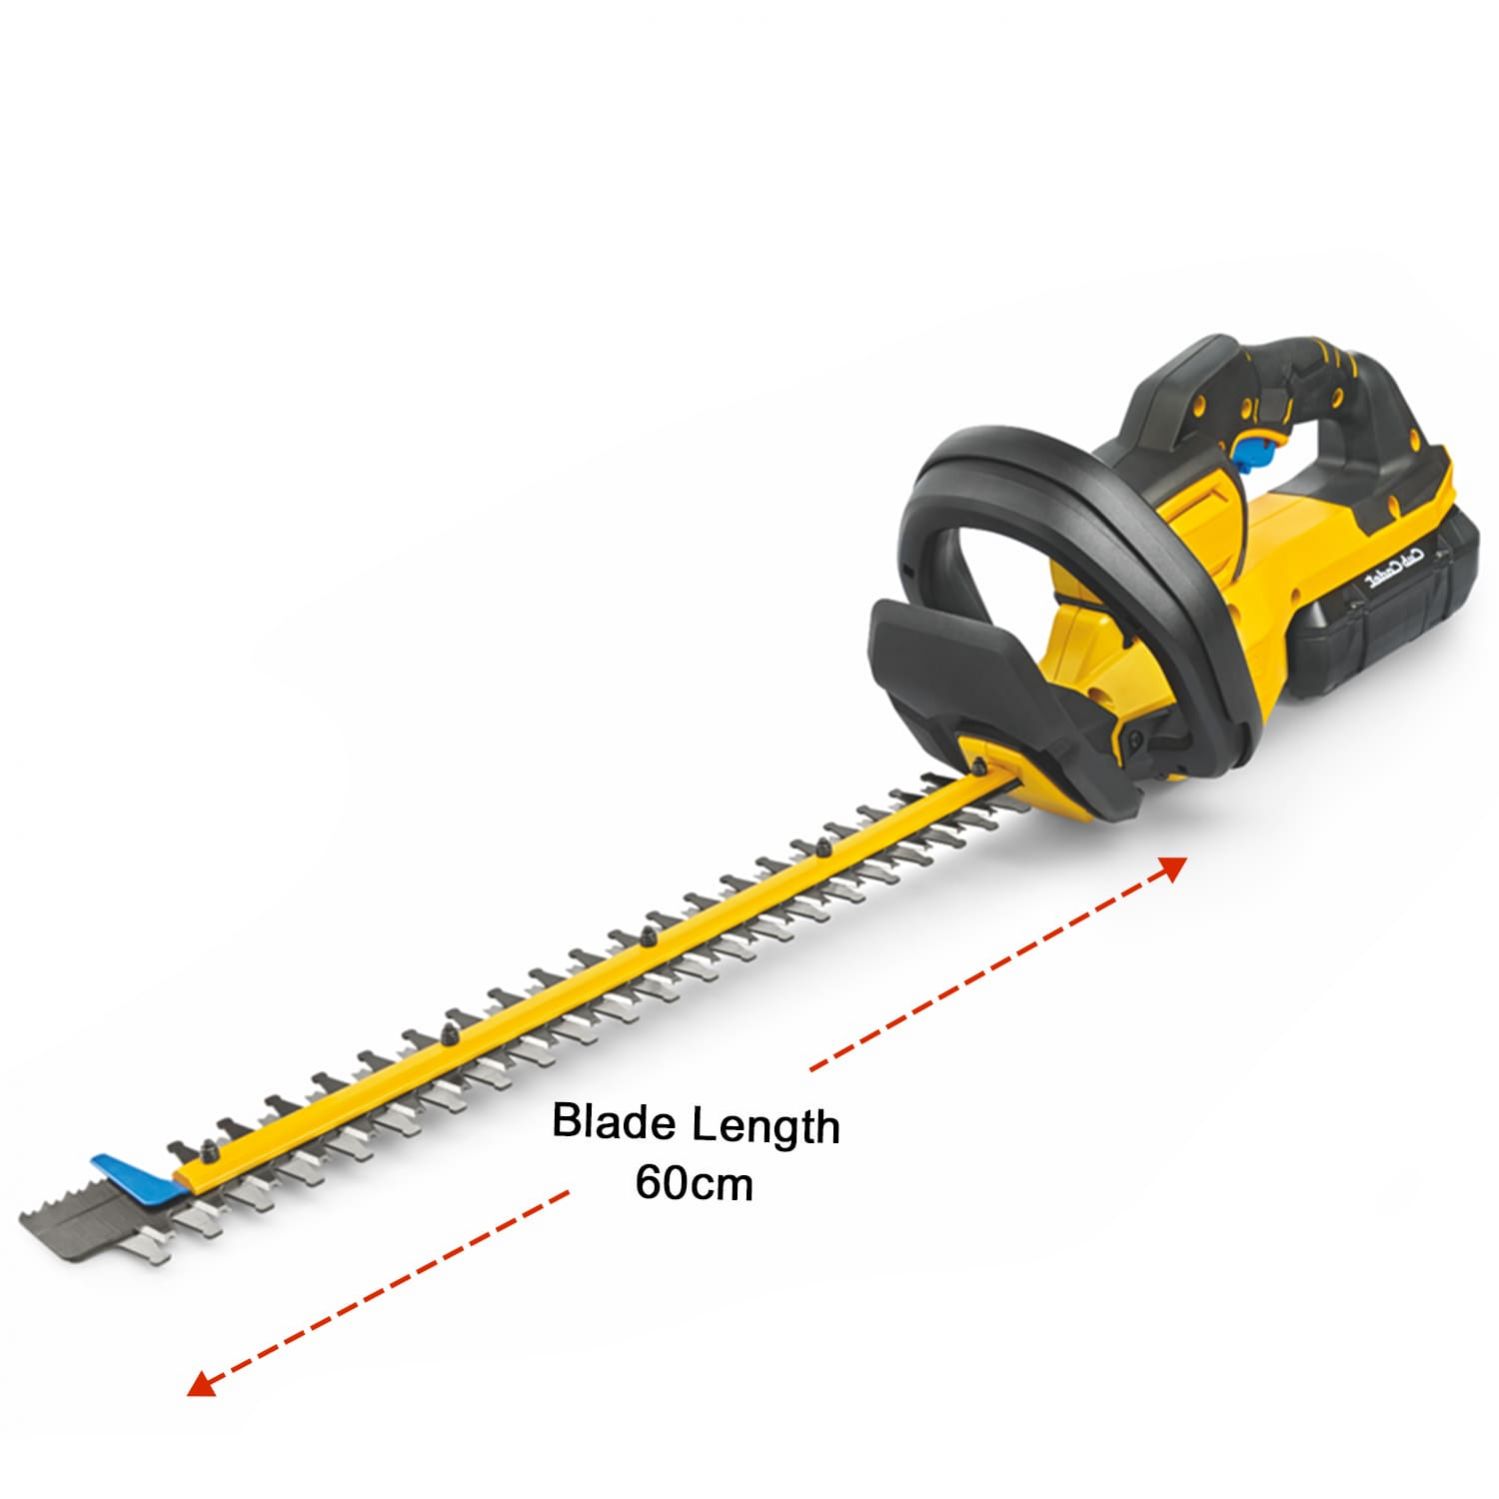 Cub Cadet Battery Hedge trimmer (LH5 H60) with 2.5 Ah battery and charger